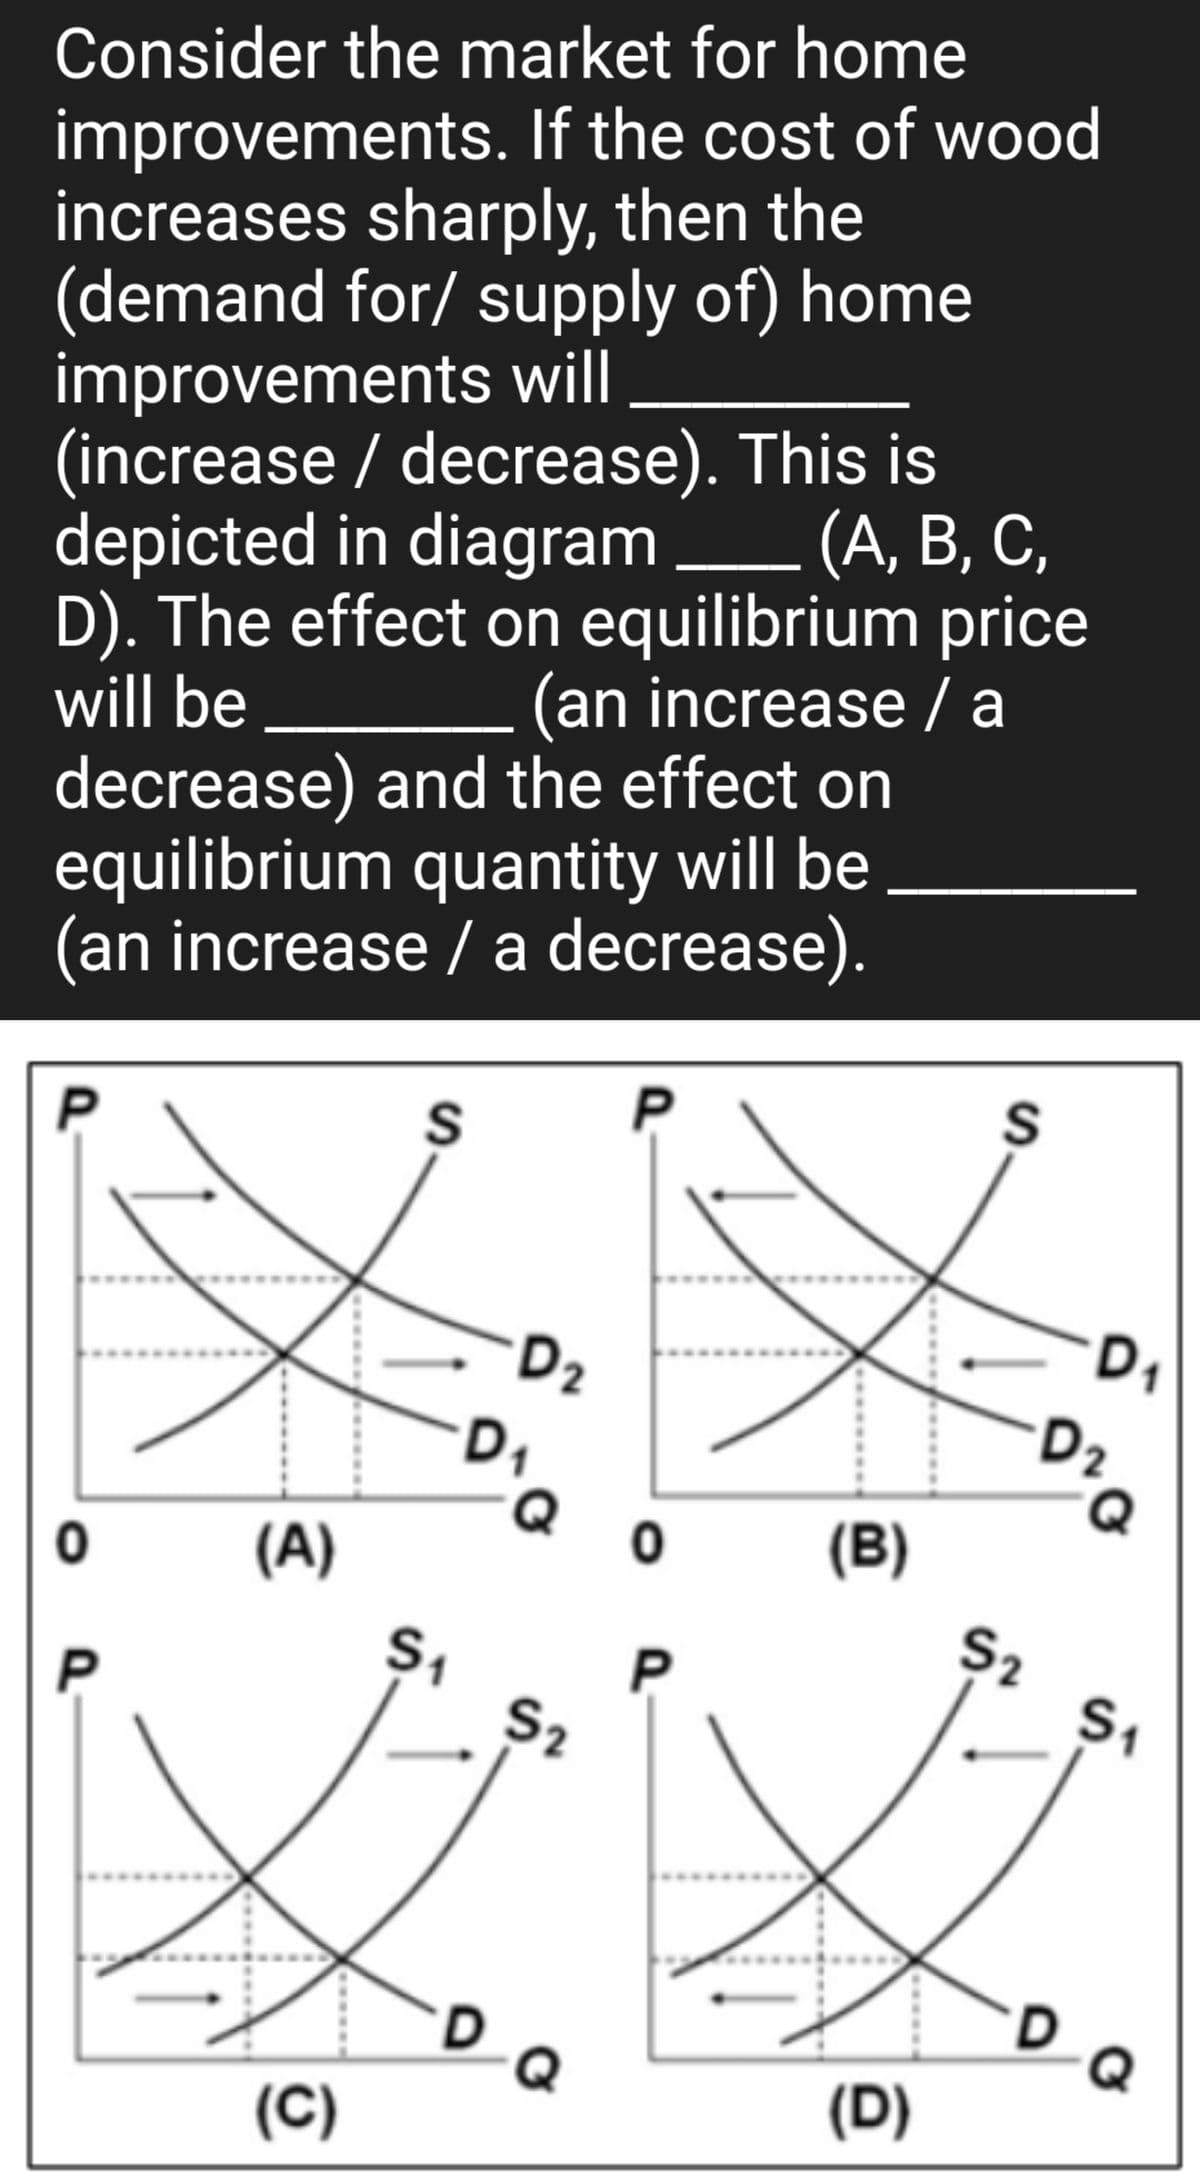 Consider the market for home
improvements. If the cost of wood
increases sharply, then the
(demand for/ supply of) home
improvements will
(increase / decrease). This is
depicted in diagram
(A, B, C,
D). The effect on equilibrium price
will be
(an increase / a
decrease) and the effect on
equilibrium quantity will be
(an increase / a decrease).
P
0
P
(A)
(C)
S
S₁
-D₂
D₁
D
S2
La
P
0
P
(B)
(D)
S
$2
D₁
D²Q
D₂
D
S₁